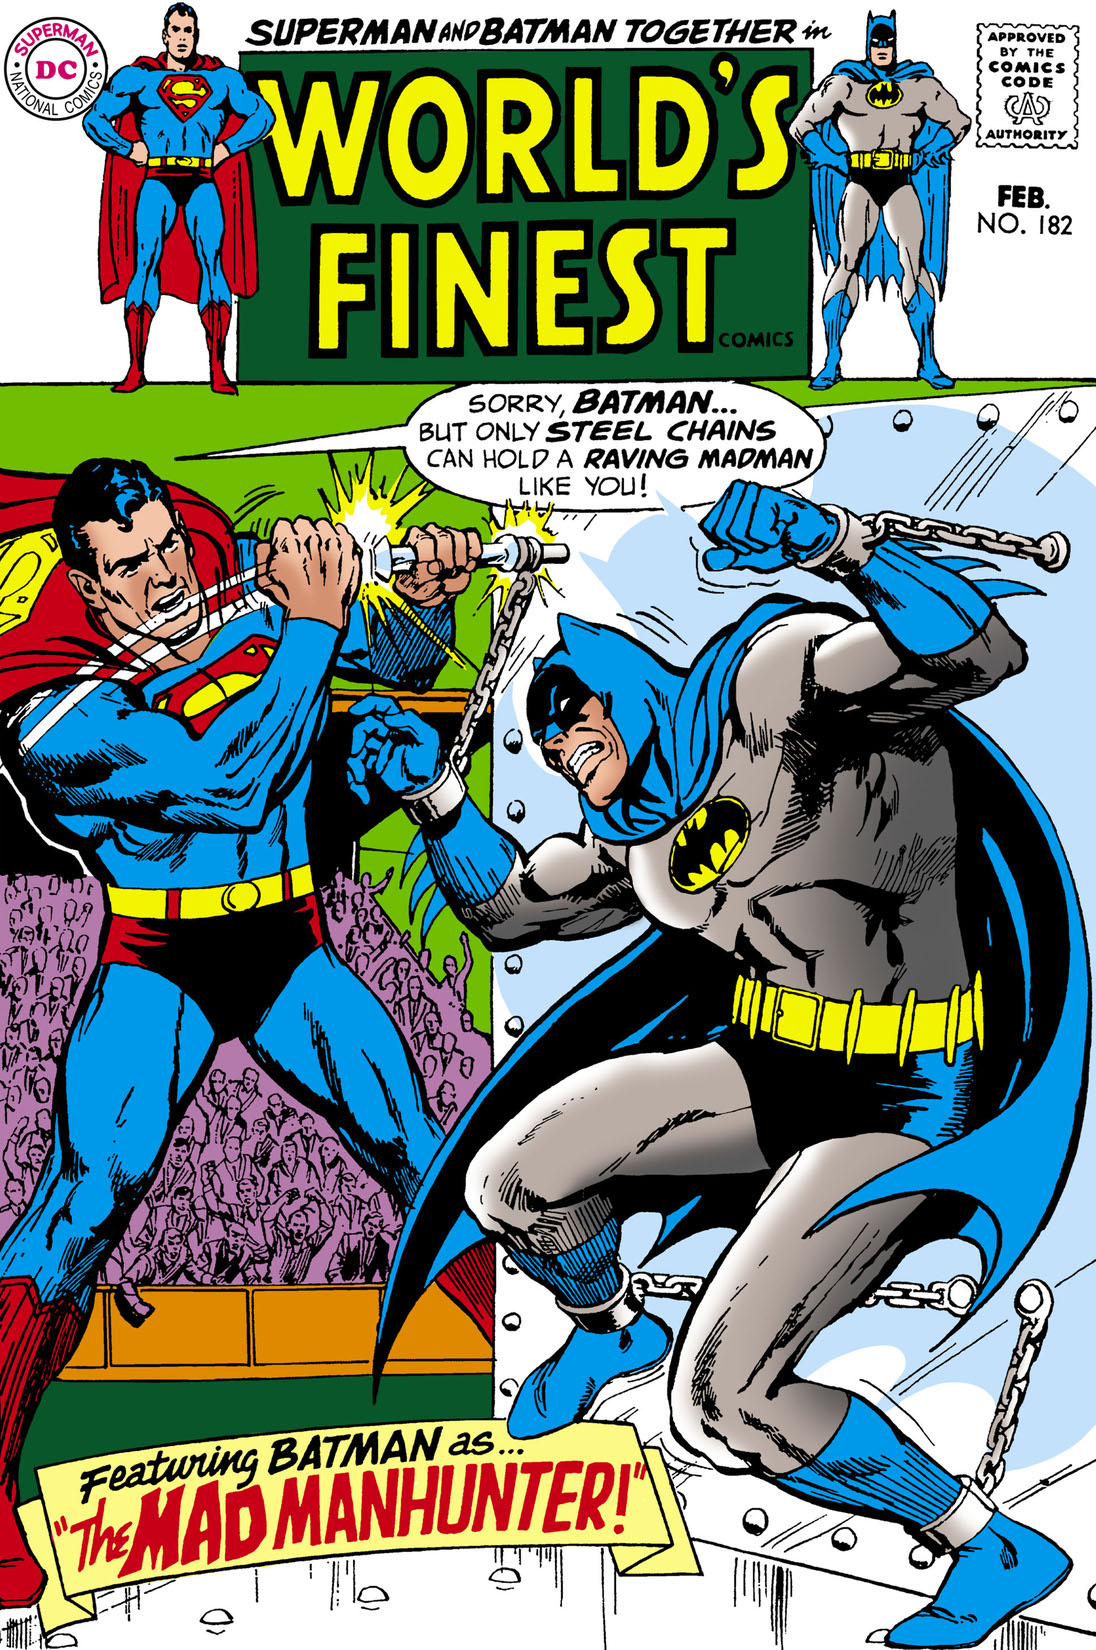 World's Finest Comics (1941-) #182 preview images